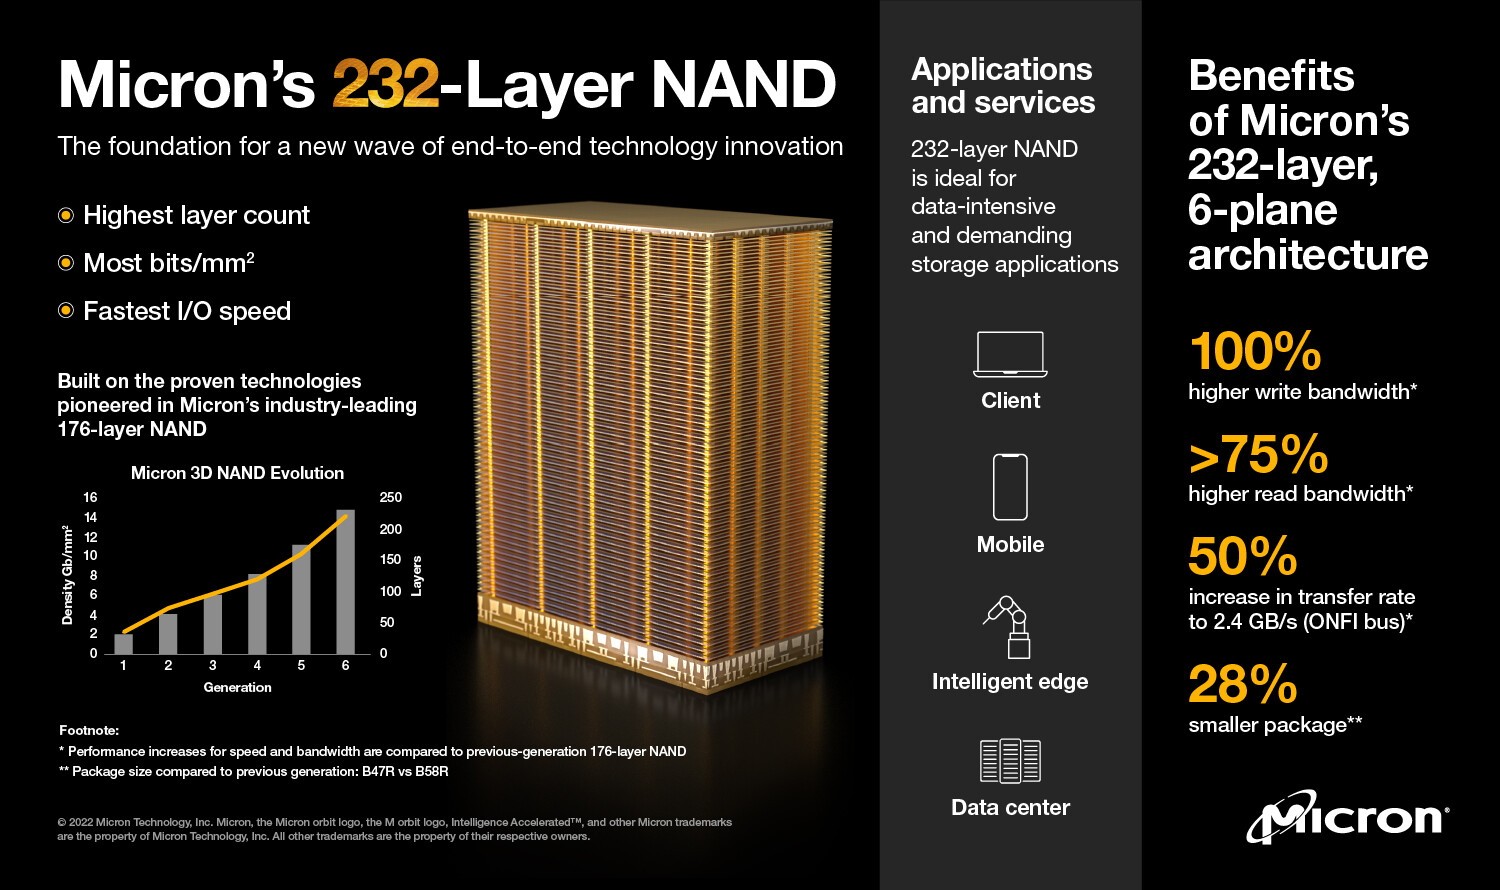 Micron: World's first 232-layer NAND introduced